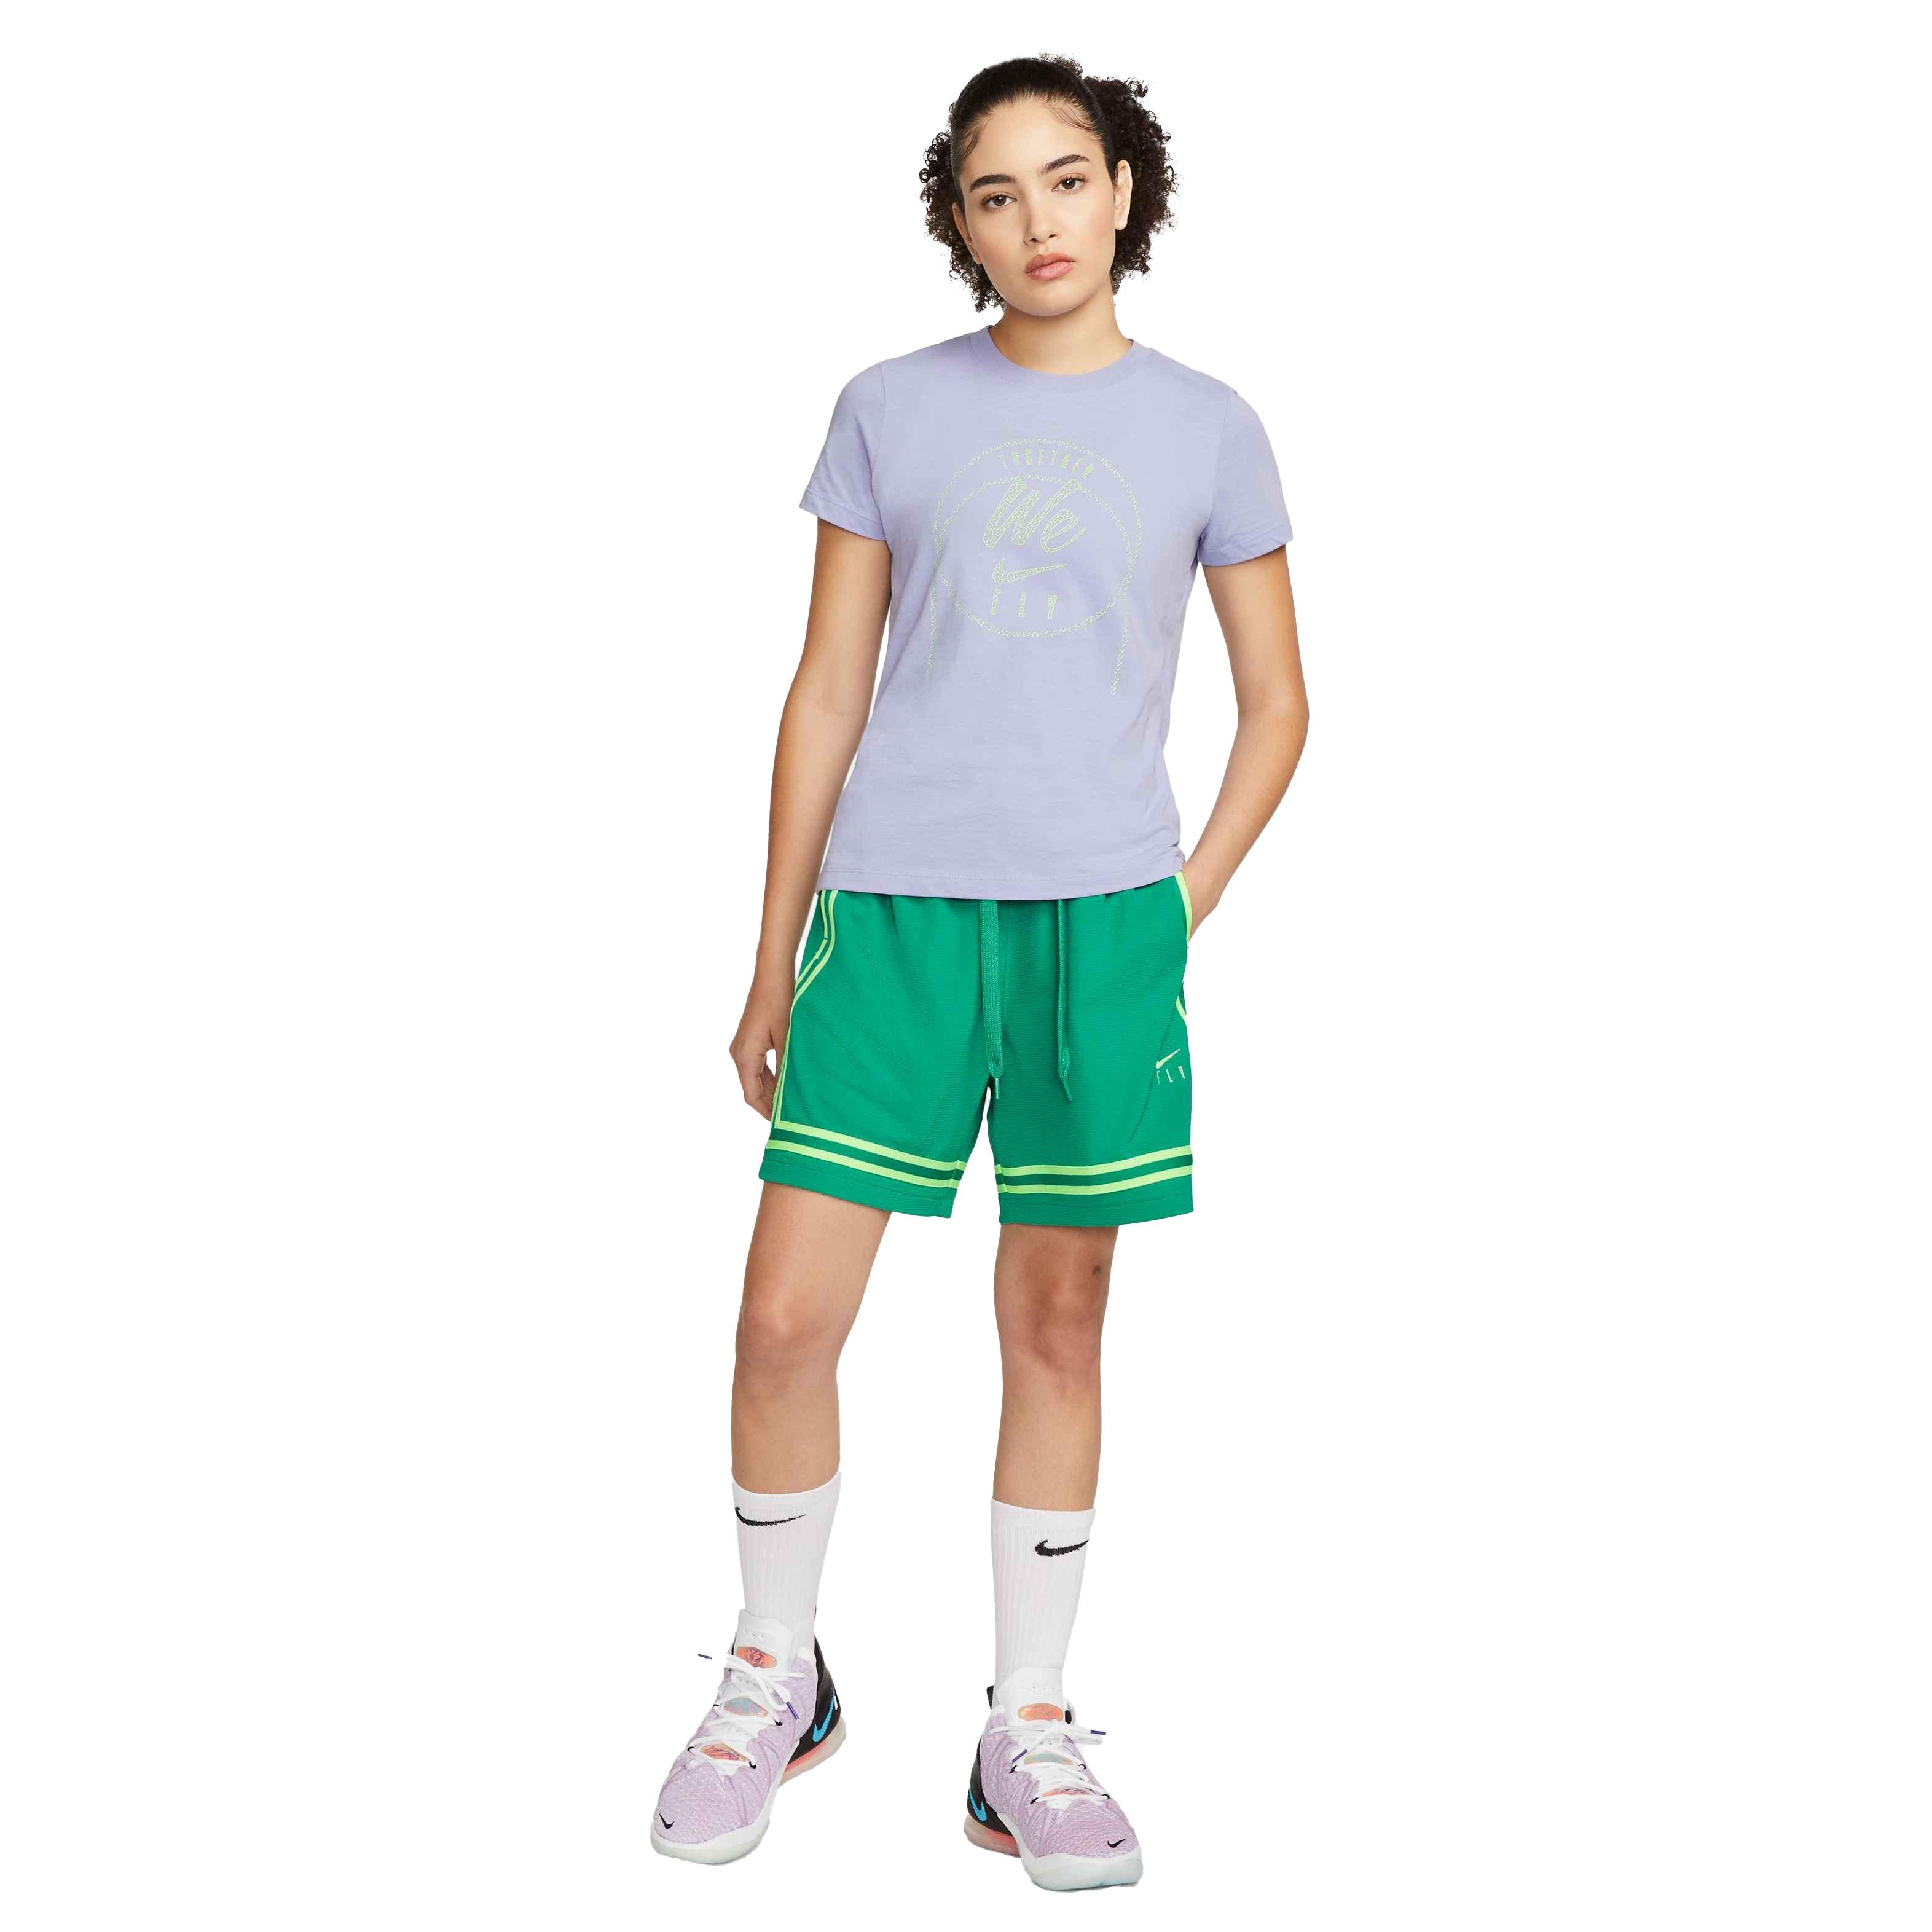 Nike Fly Crossover Short Pants Grey